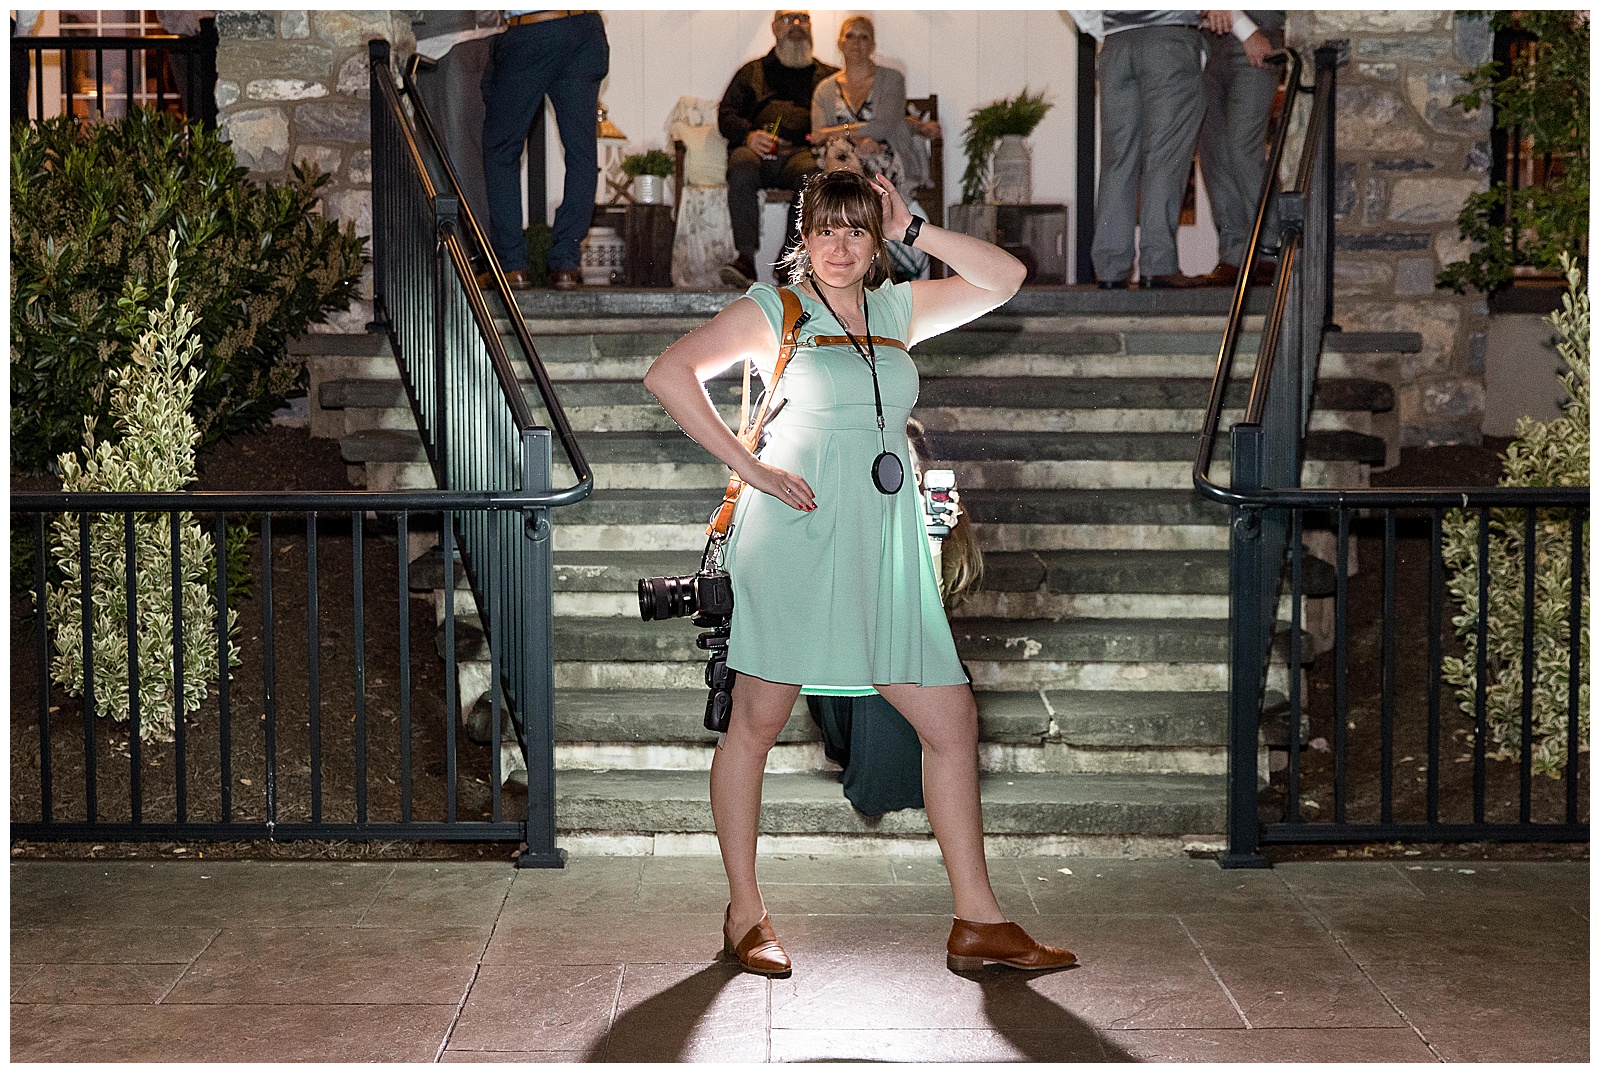 photographer striking a pose with right hand on hip and left hand on head by staircase at reception venue at nighttime